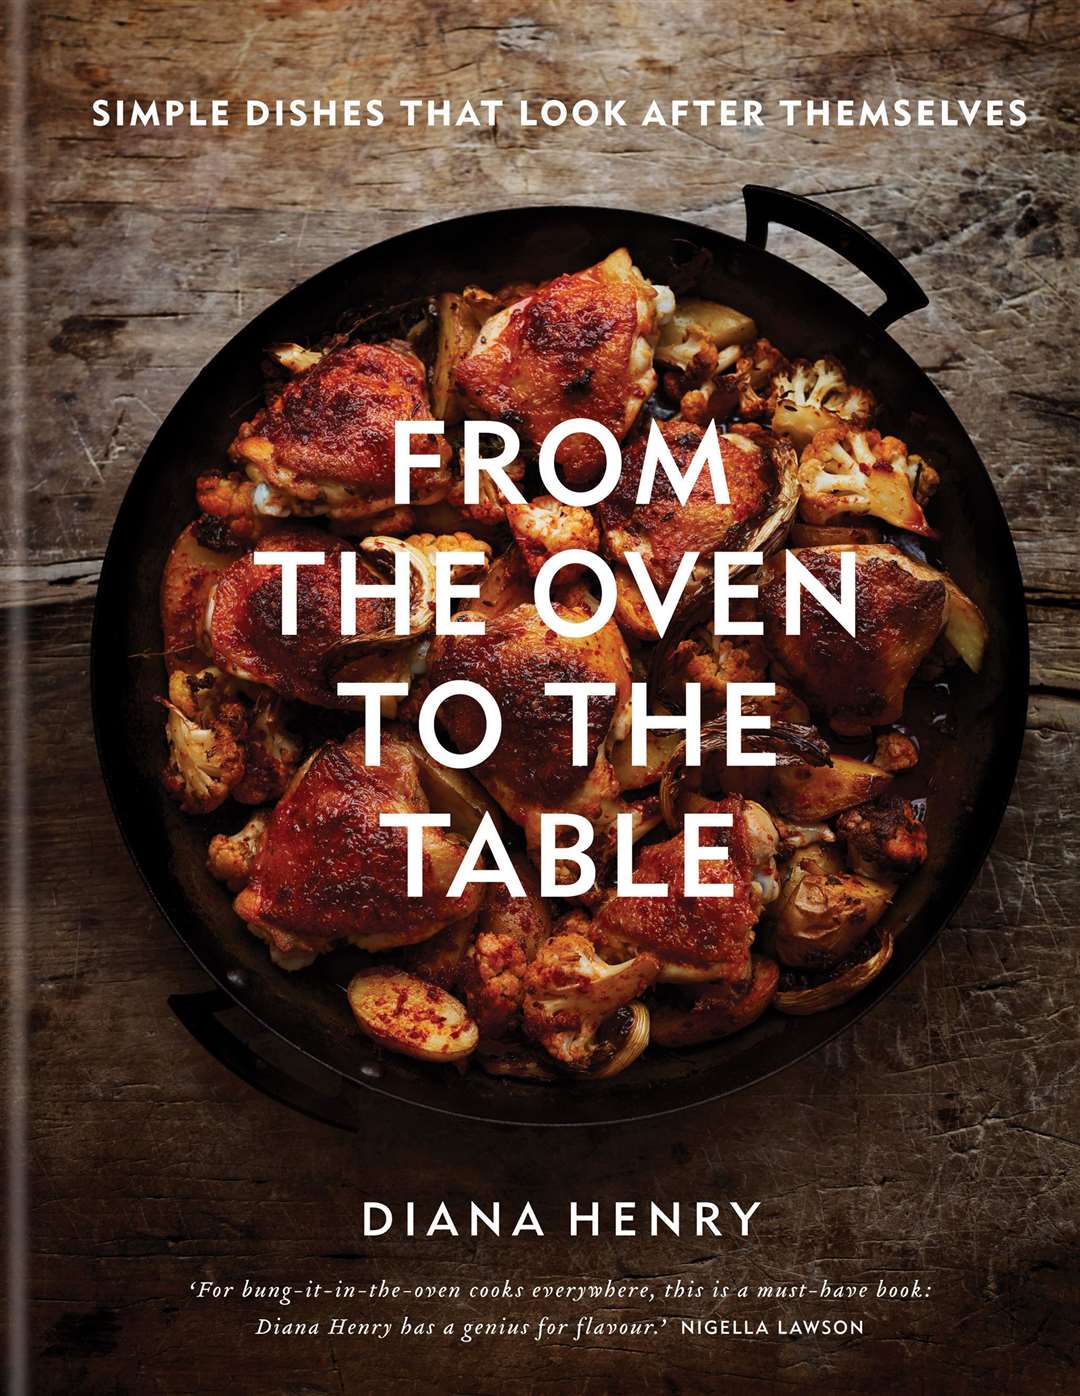 From The Oven To The Table: Simple Dishes That Look After Themselves by Diana Henry, is published by Mitchell Beazley, priced £25 (octopusbooks.co.uk). Available now.